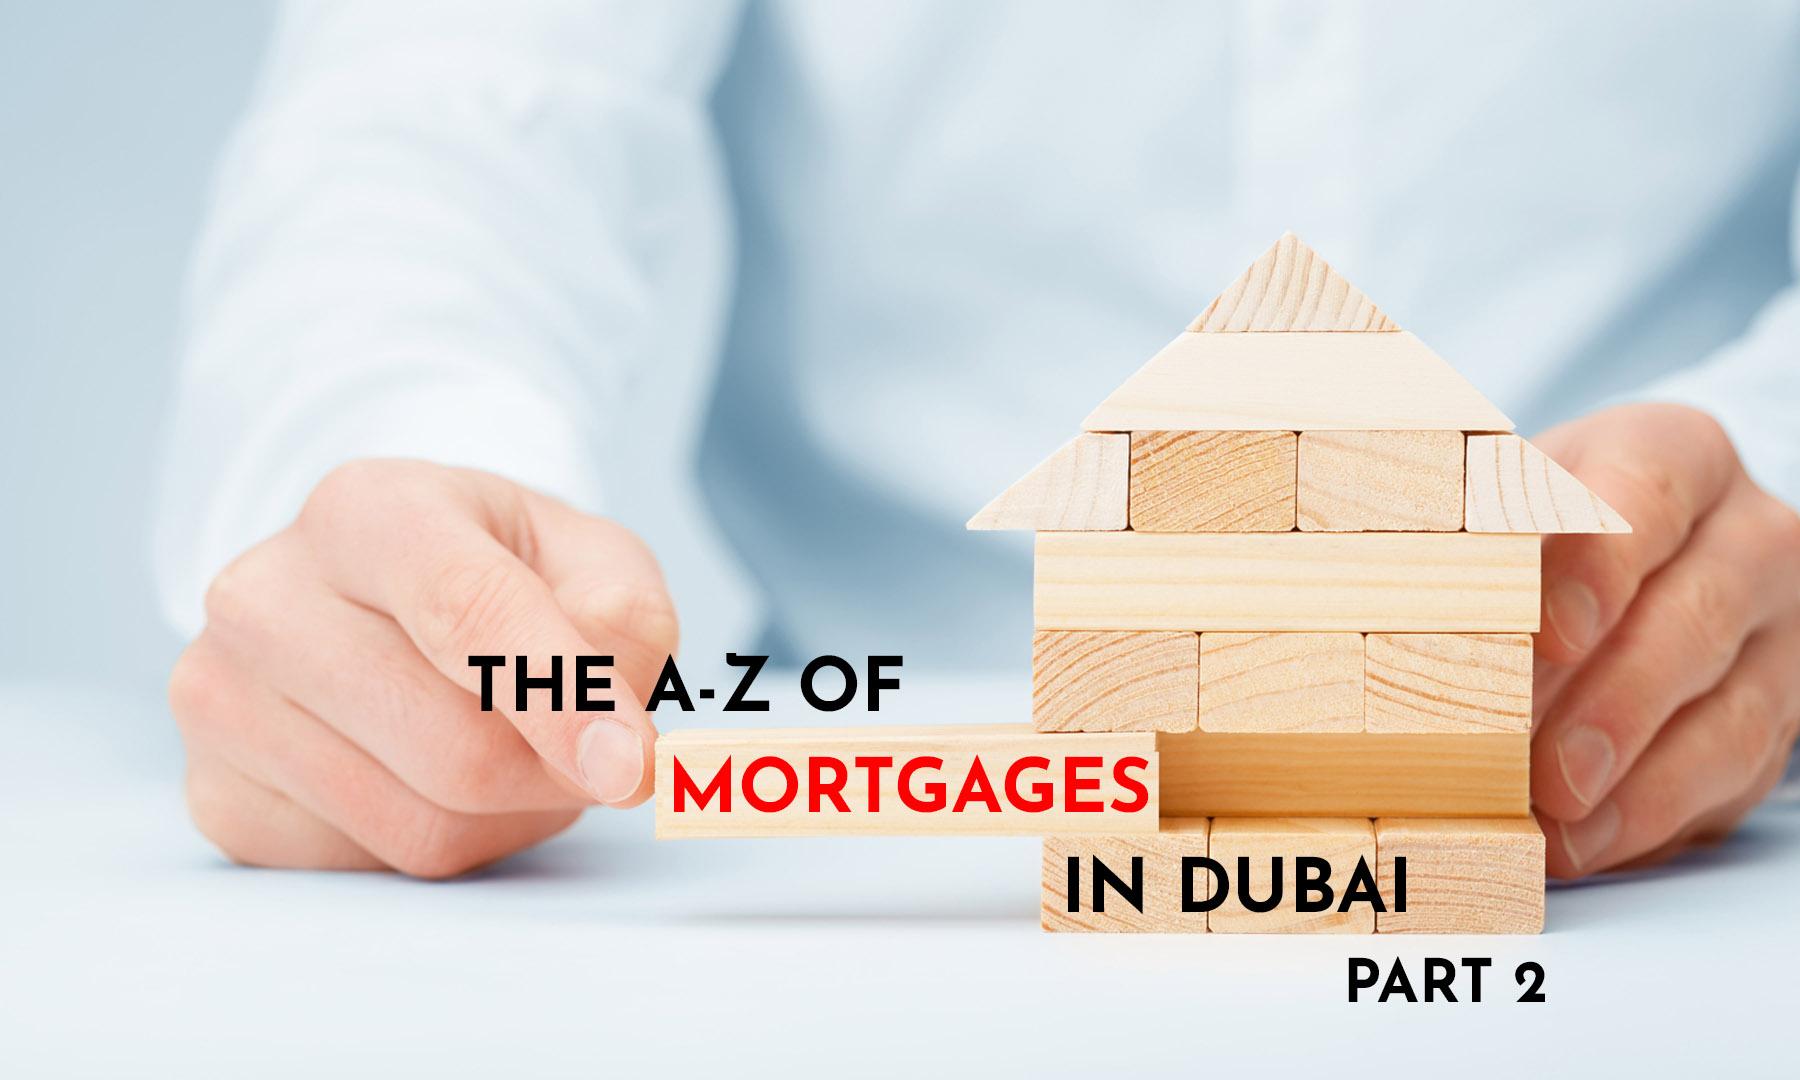 THE A-Z OF MORTGAGES IN DUBAI – Part 2